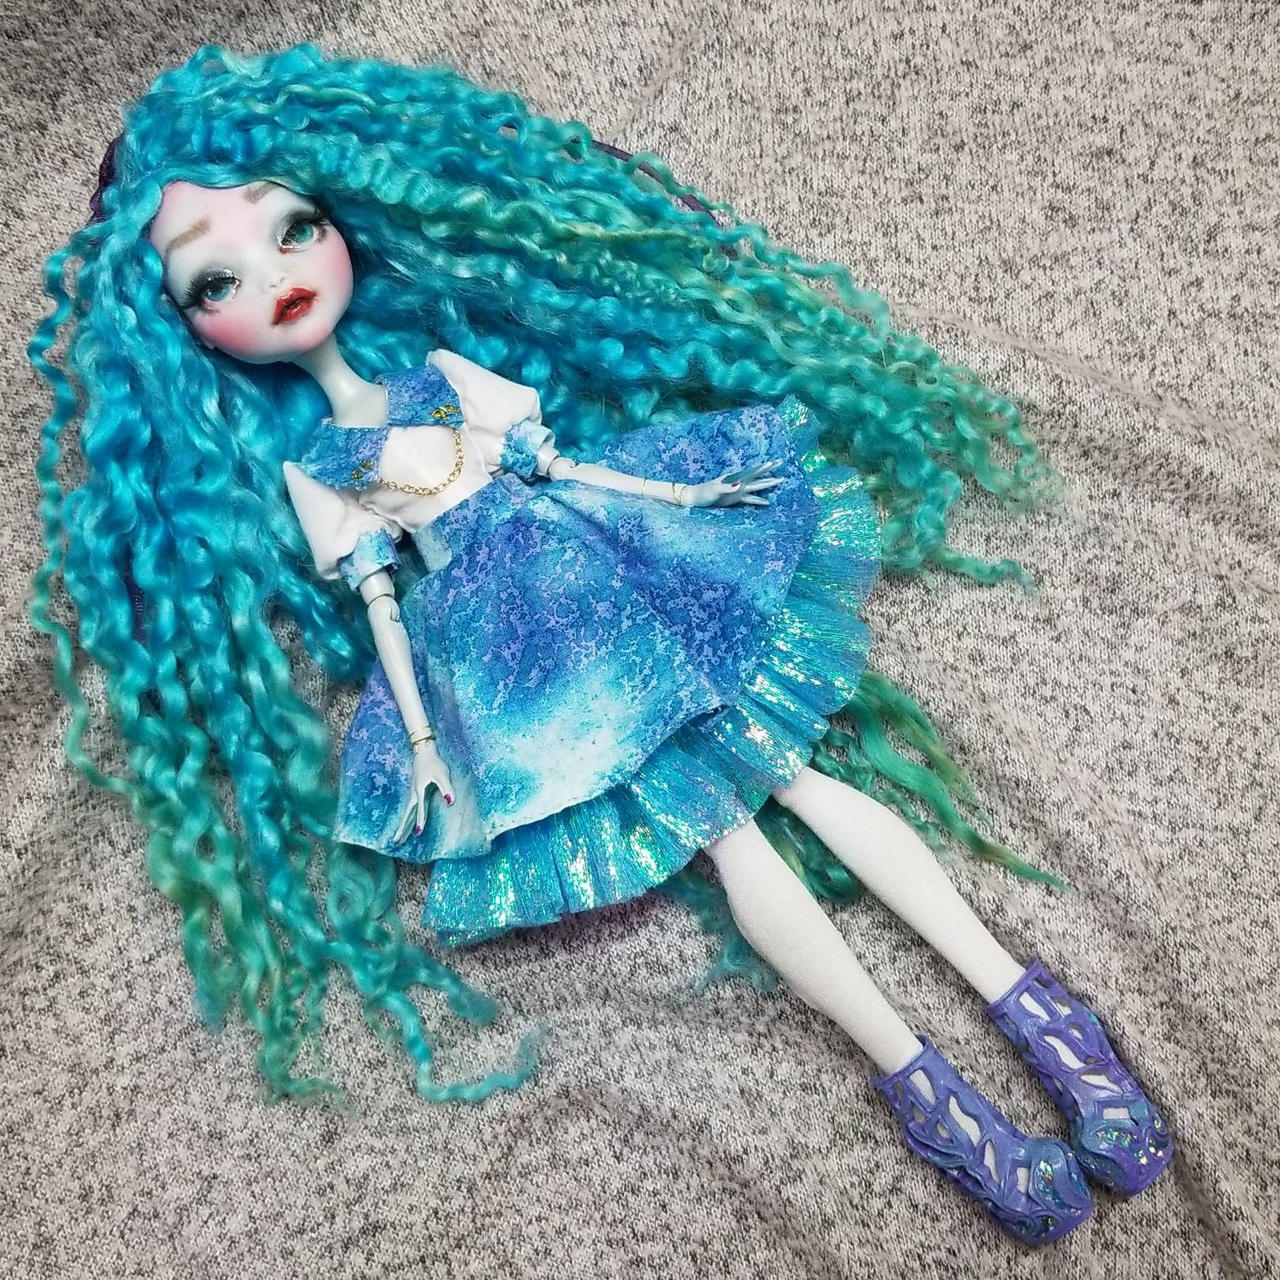 Doll Customising: Monster High Dolls - Prepping and Rerooting  Doll  repaint tutorial, Monster high dolls, Custom monster high dolls